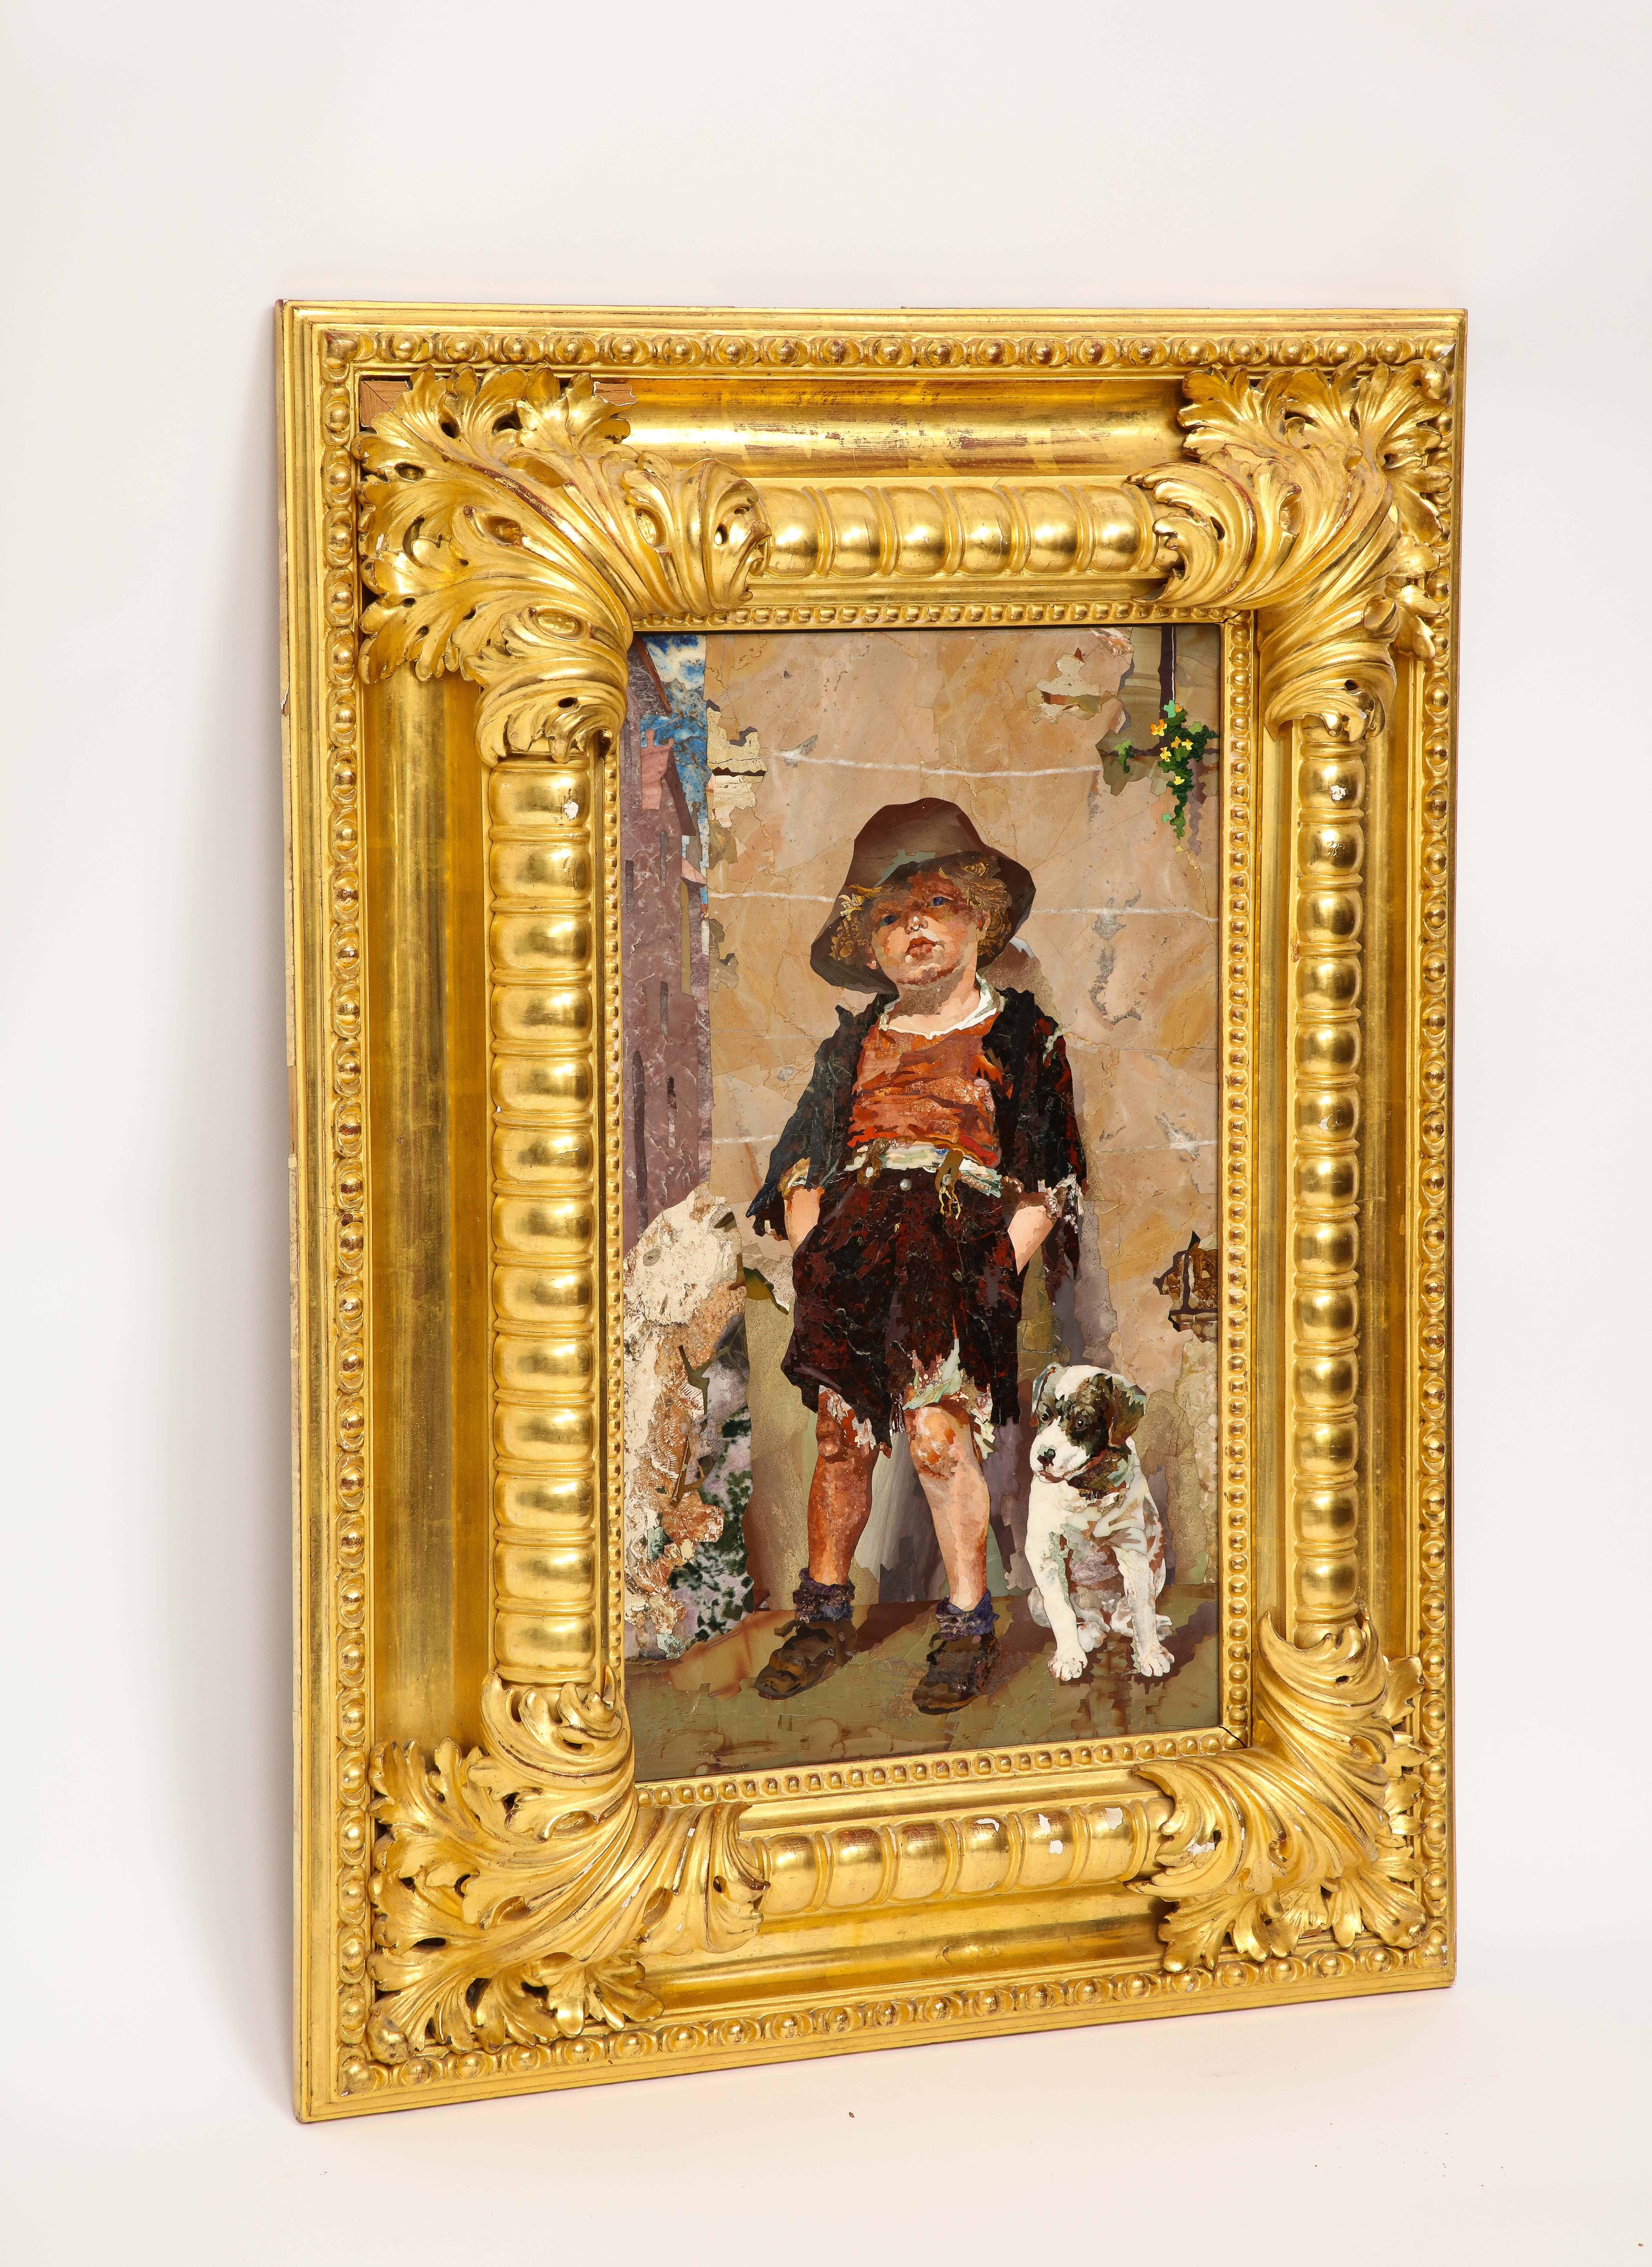 A Highly Important and Rare Italian Giltwood Framed Pietre Dure Signed By Mario Montelatici Called 'Two Little Tykes'.  This incredible Italian Florentine artistic masterpiece appears to be a painting, however, upon close observation, the piece is